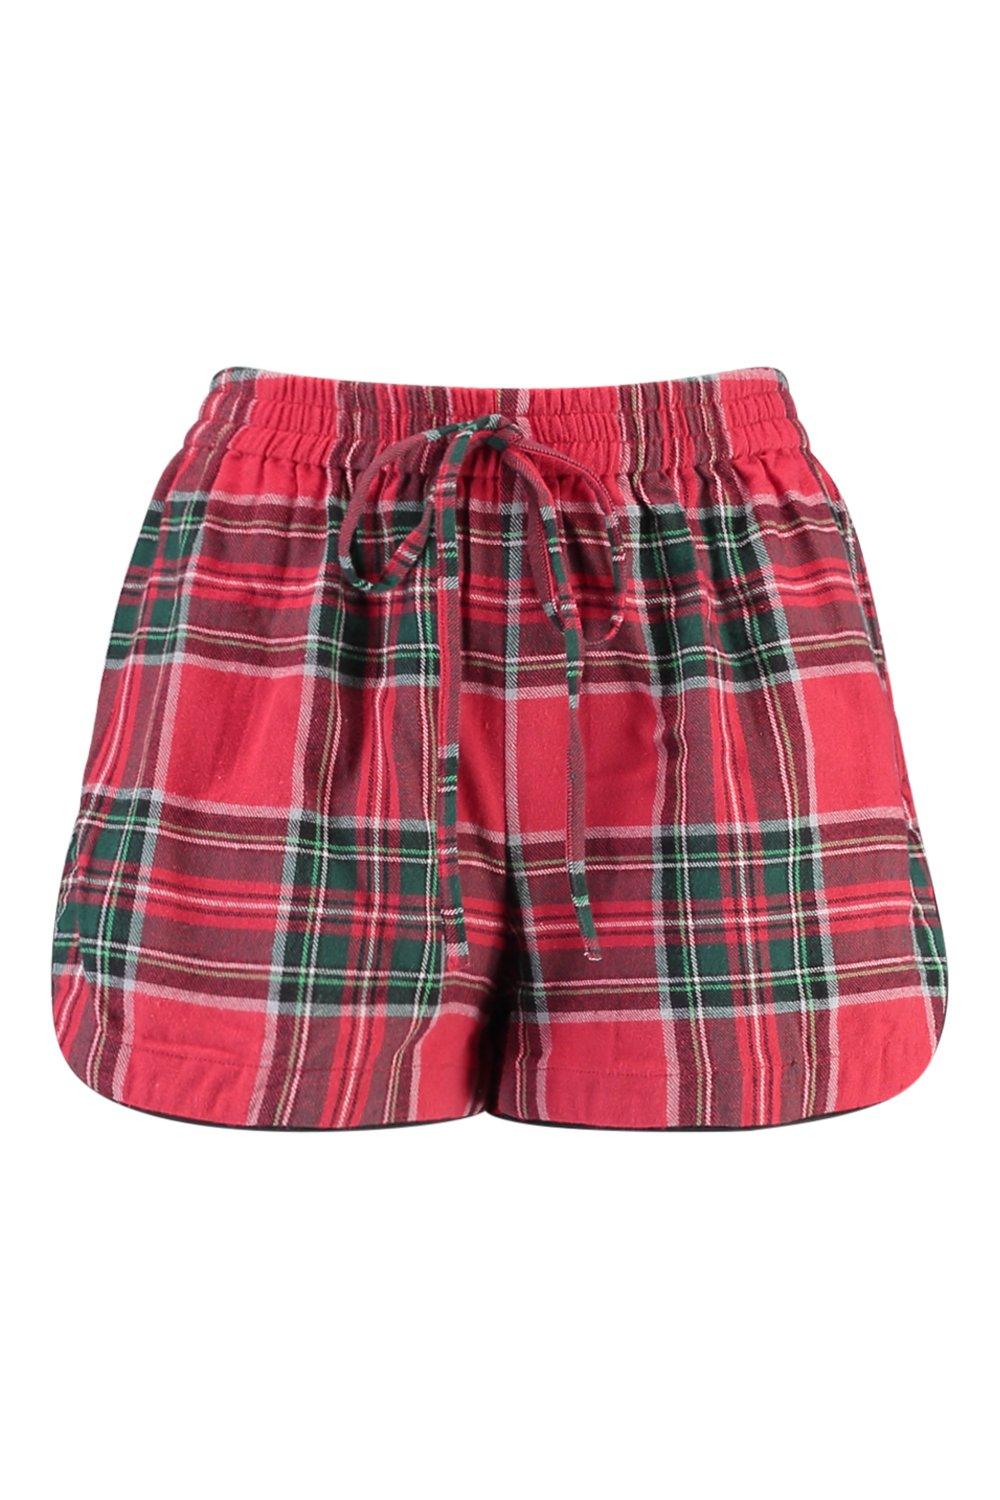 Mix and Match Flannel Check PJ Shorts